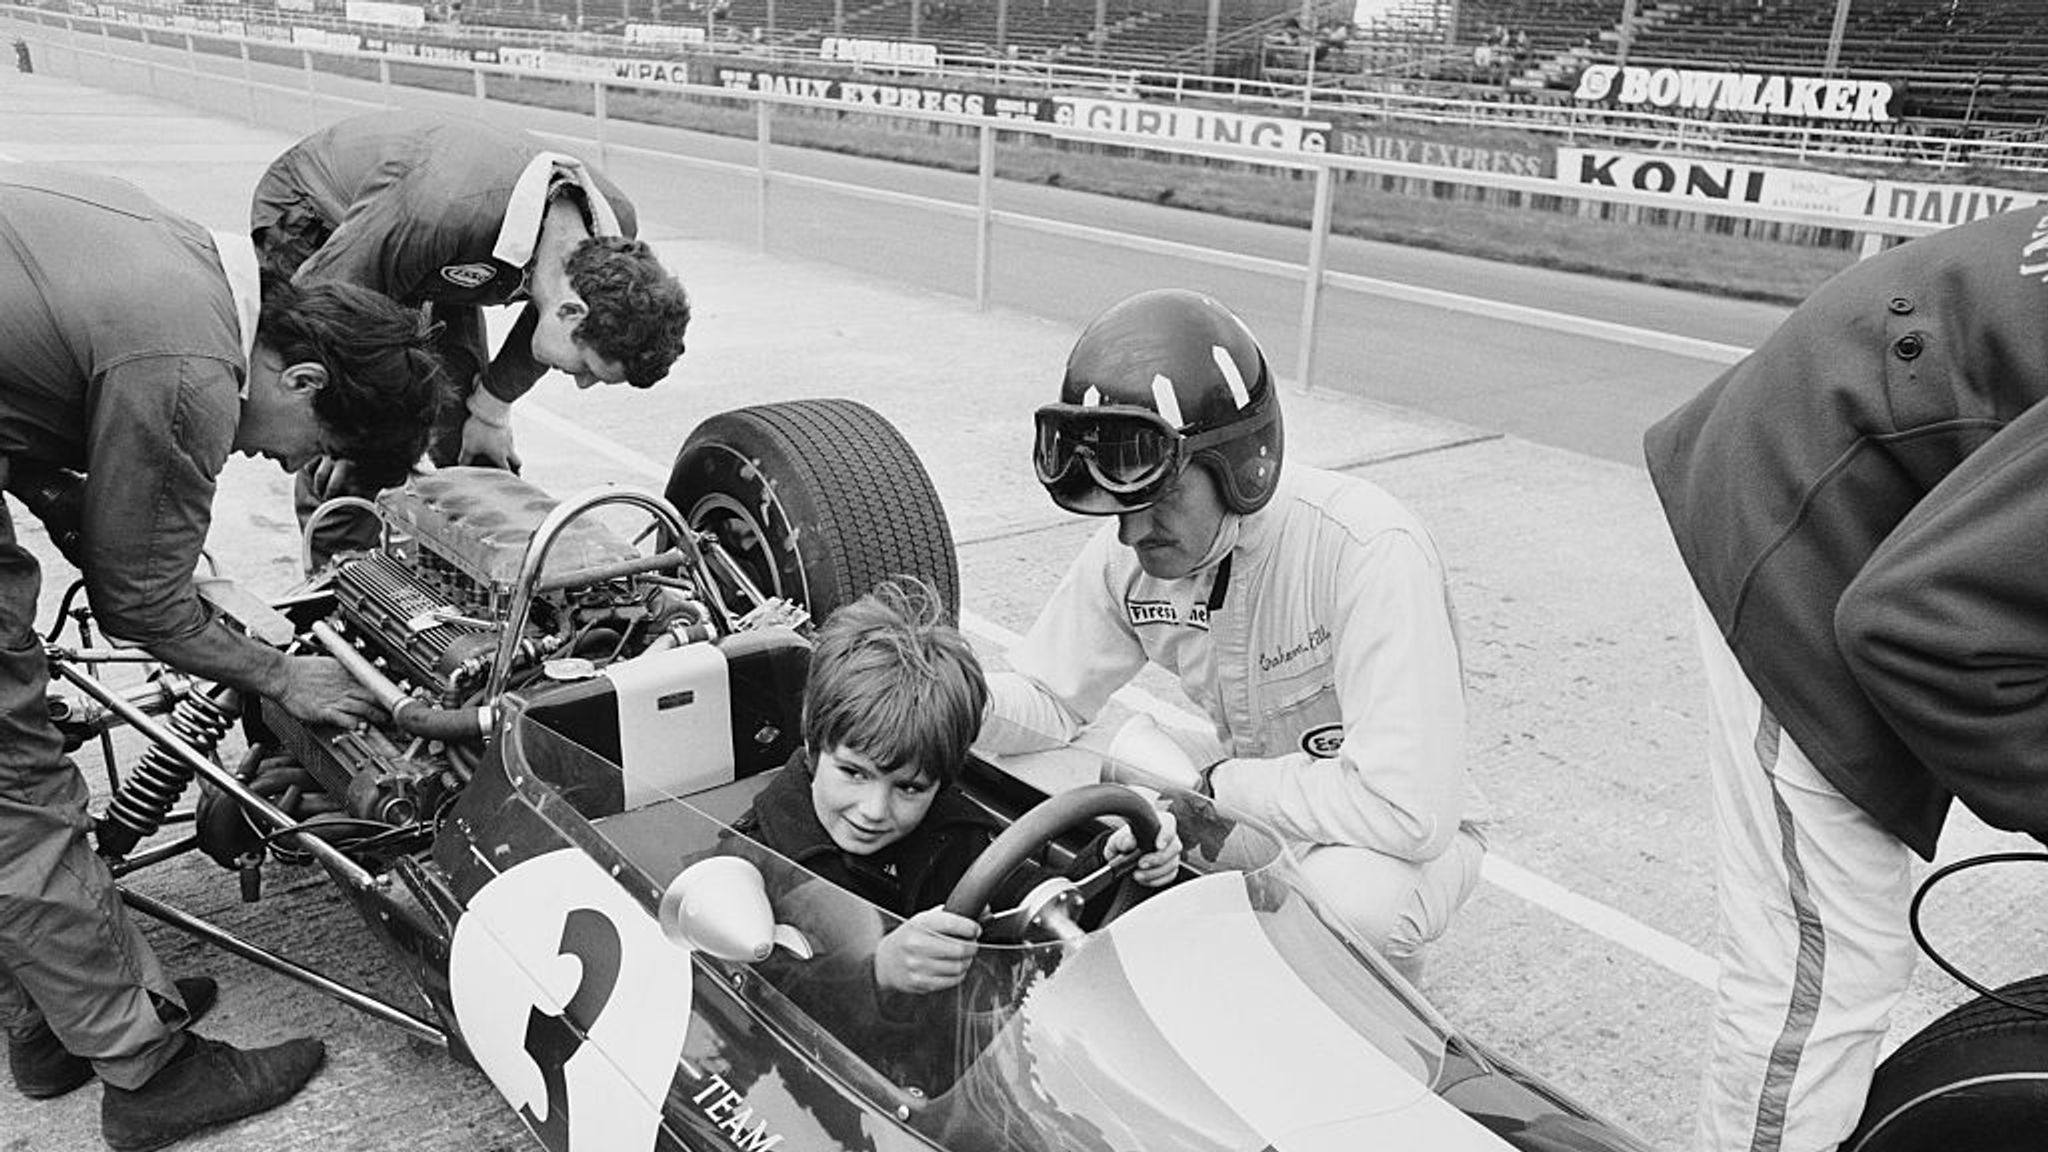 Graham Hill's F1 trophies are going under the hammer